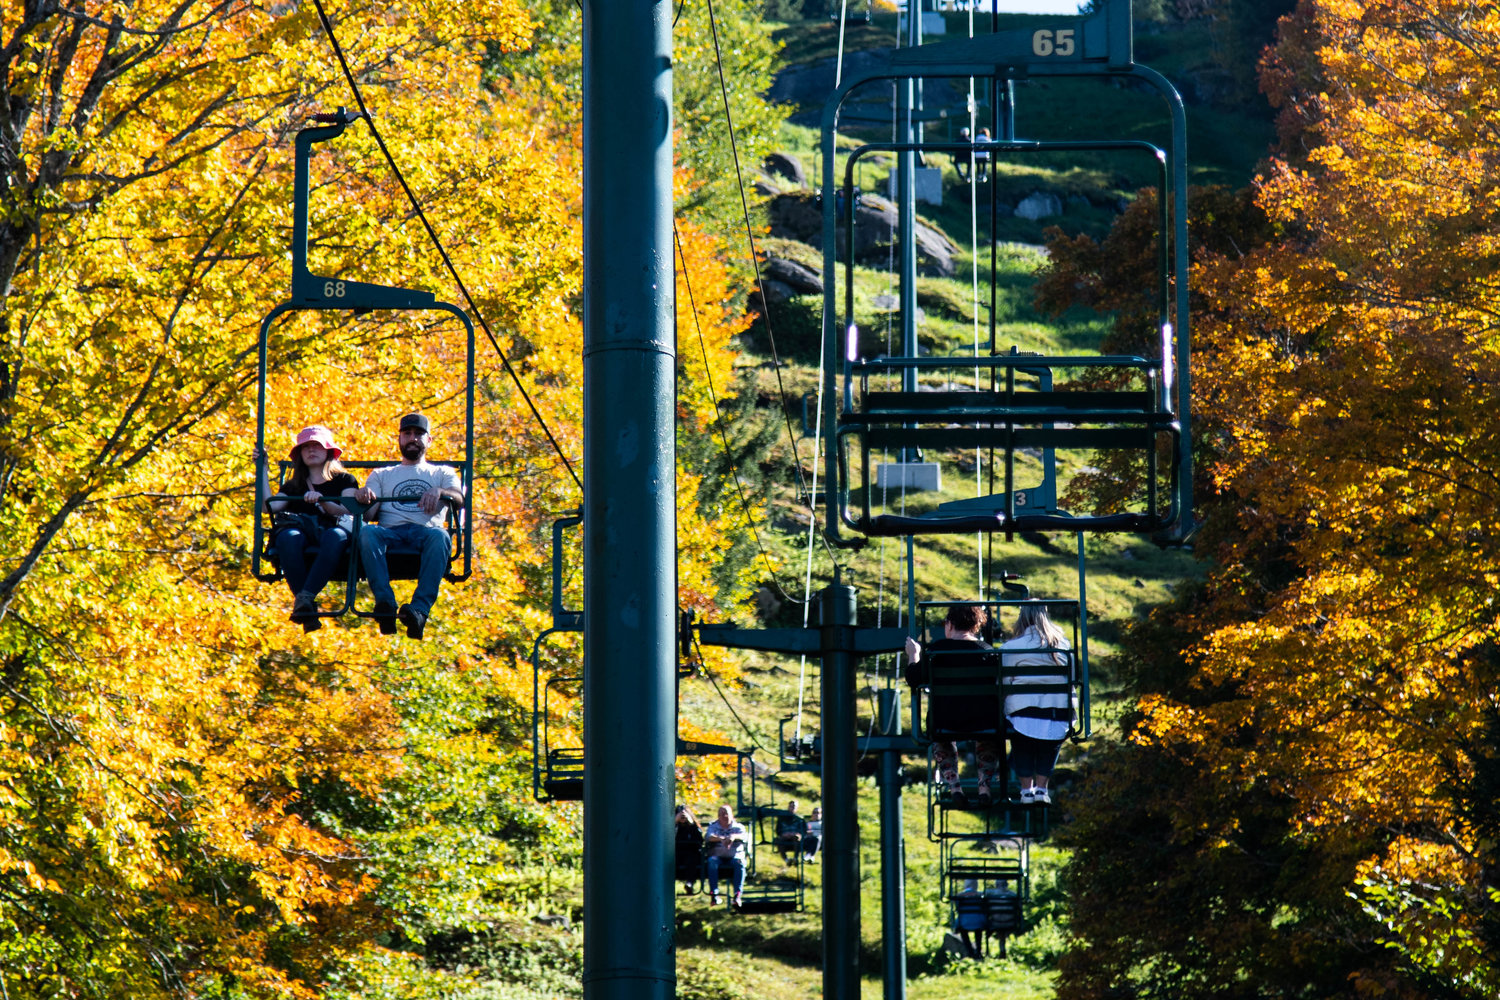 People ride the scenic chairlift ride at McCauley Mountain on Wednesday, Oct. 5, in Old Forge. Guests are able to view peak fall foliage from the lift and top of the mountain.